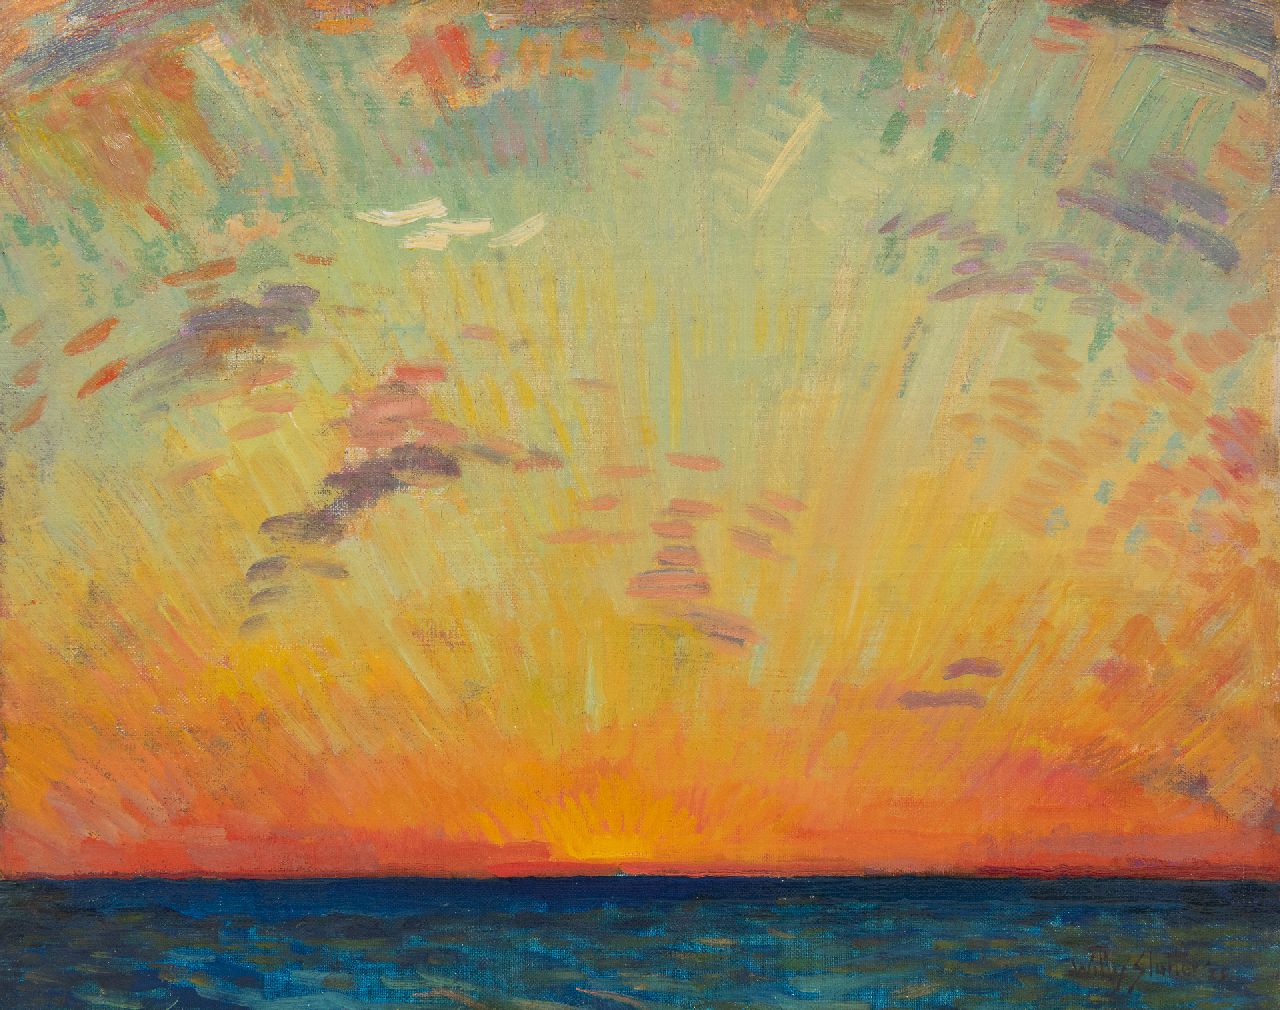 Sluiter J.W.  | Jan Willem 'Willy' Sluiter, Sunset in the Indian Ocean, oil on canvas 40.2 x 50.2 cm, signed l.r. and dated '23